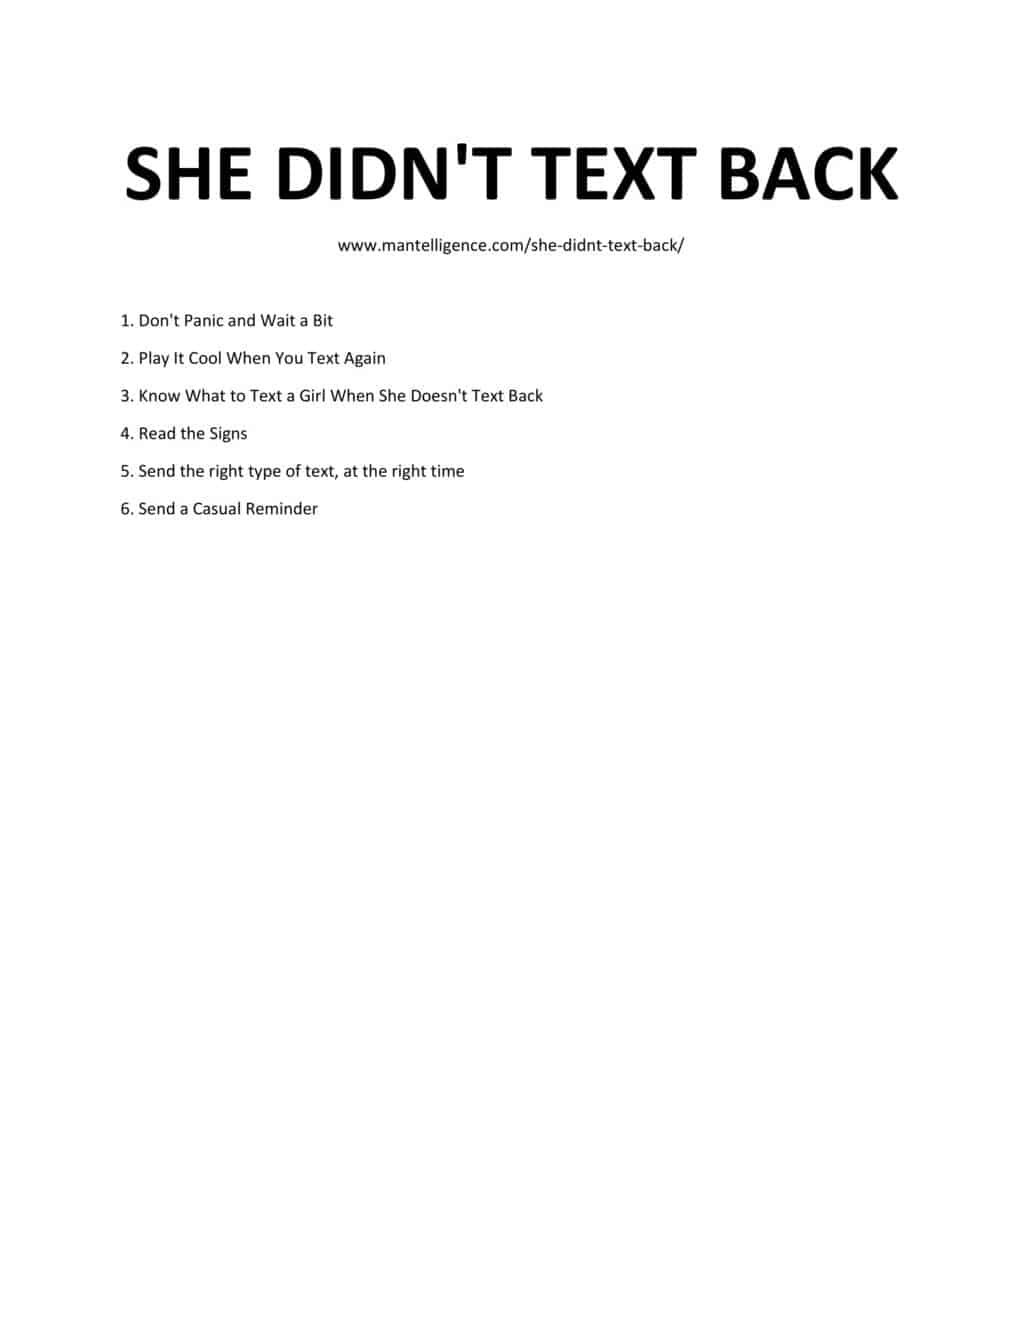 Downloadable list of steps of when She Didn't Text Back